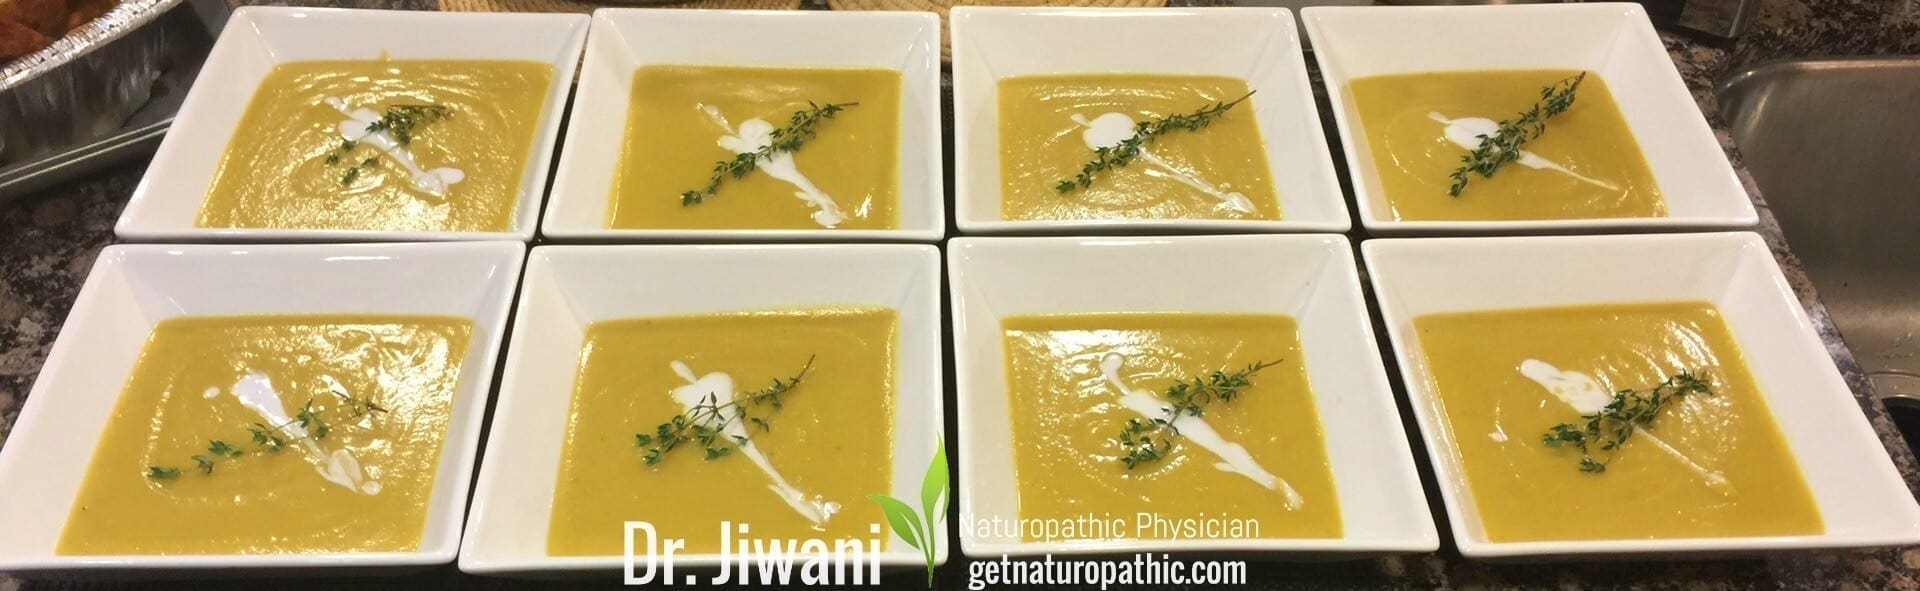 Dr. Jiwani's Butternut Squash Soup is Flavourful, Low Carb, Gluten-Free, Egg-Free, Dairy-Free, Soy-Free, Corn-Free, Ideal For Paleo, Keto, Vegan & Allergy-Free Diets | Dr. Jiwani's Naturopathic Nuggets